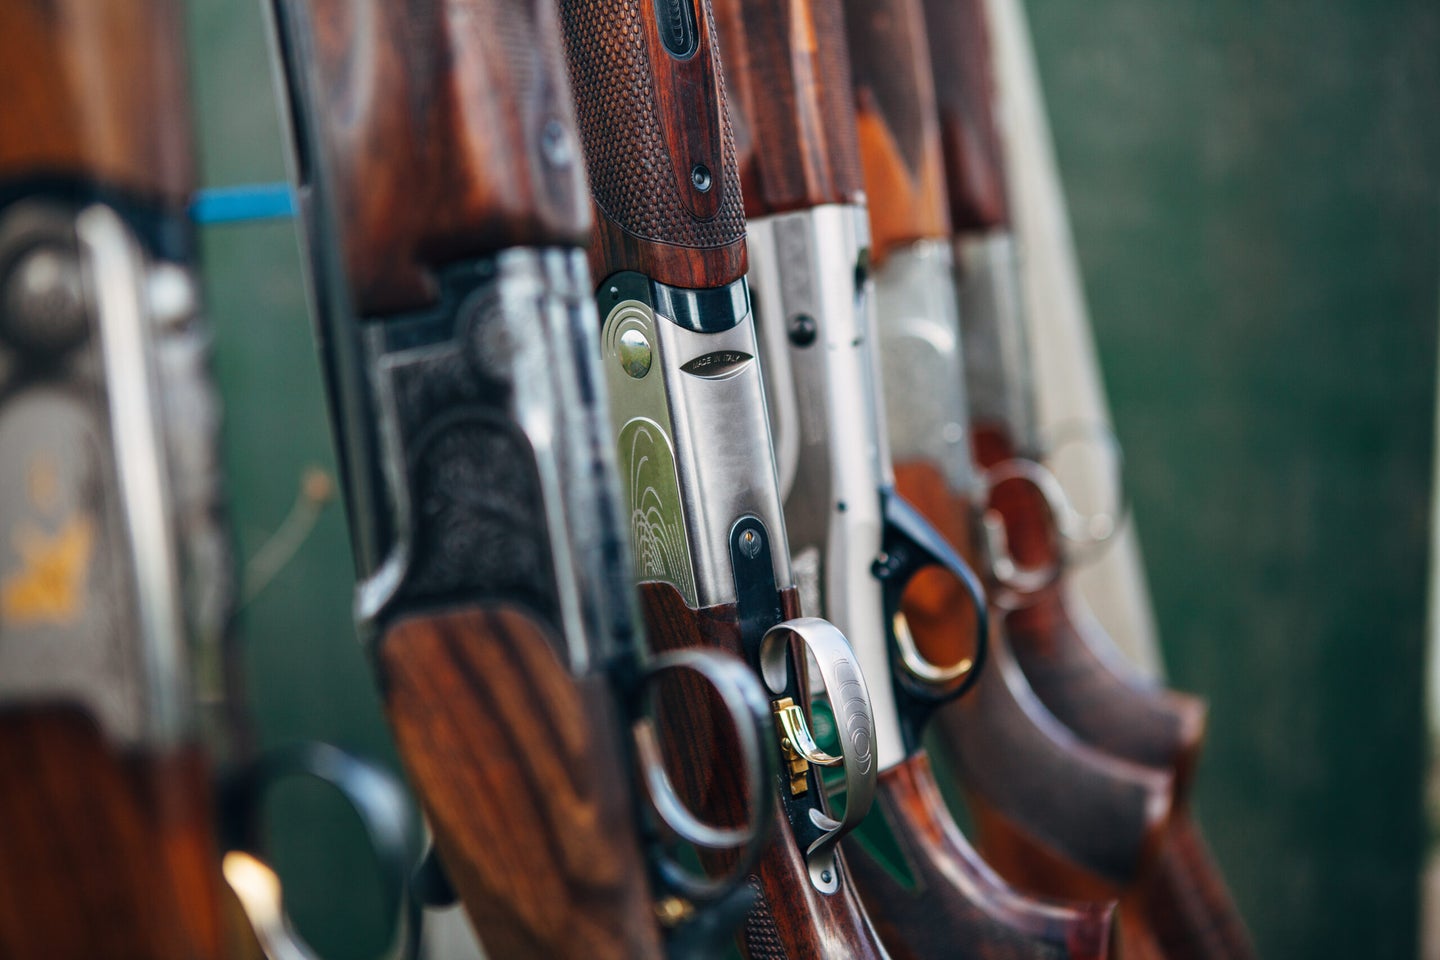 Various styles and types of sporting shotguns standing in a rack at a clay pigeon skeet shooting range.